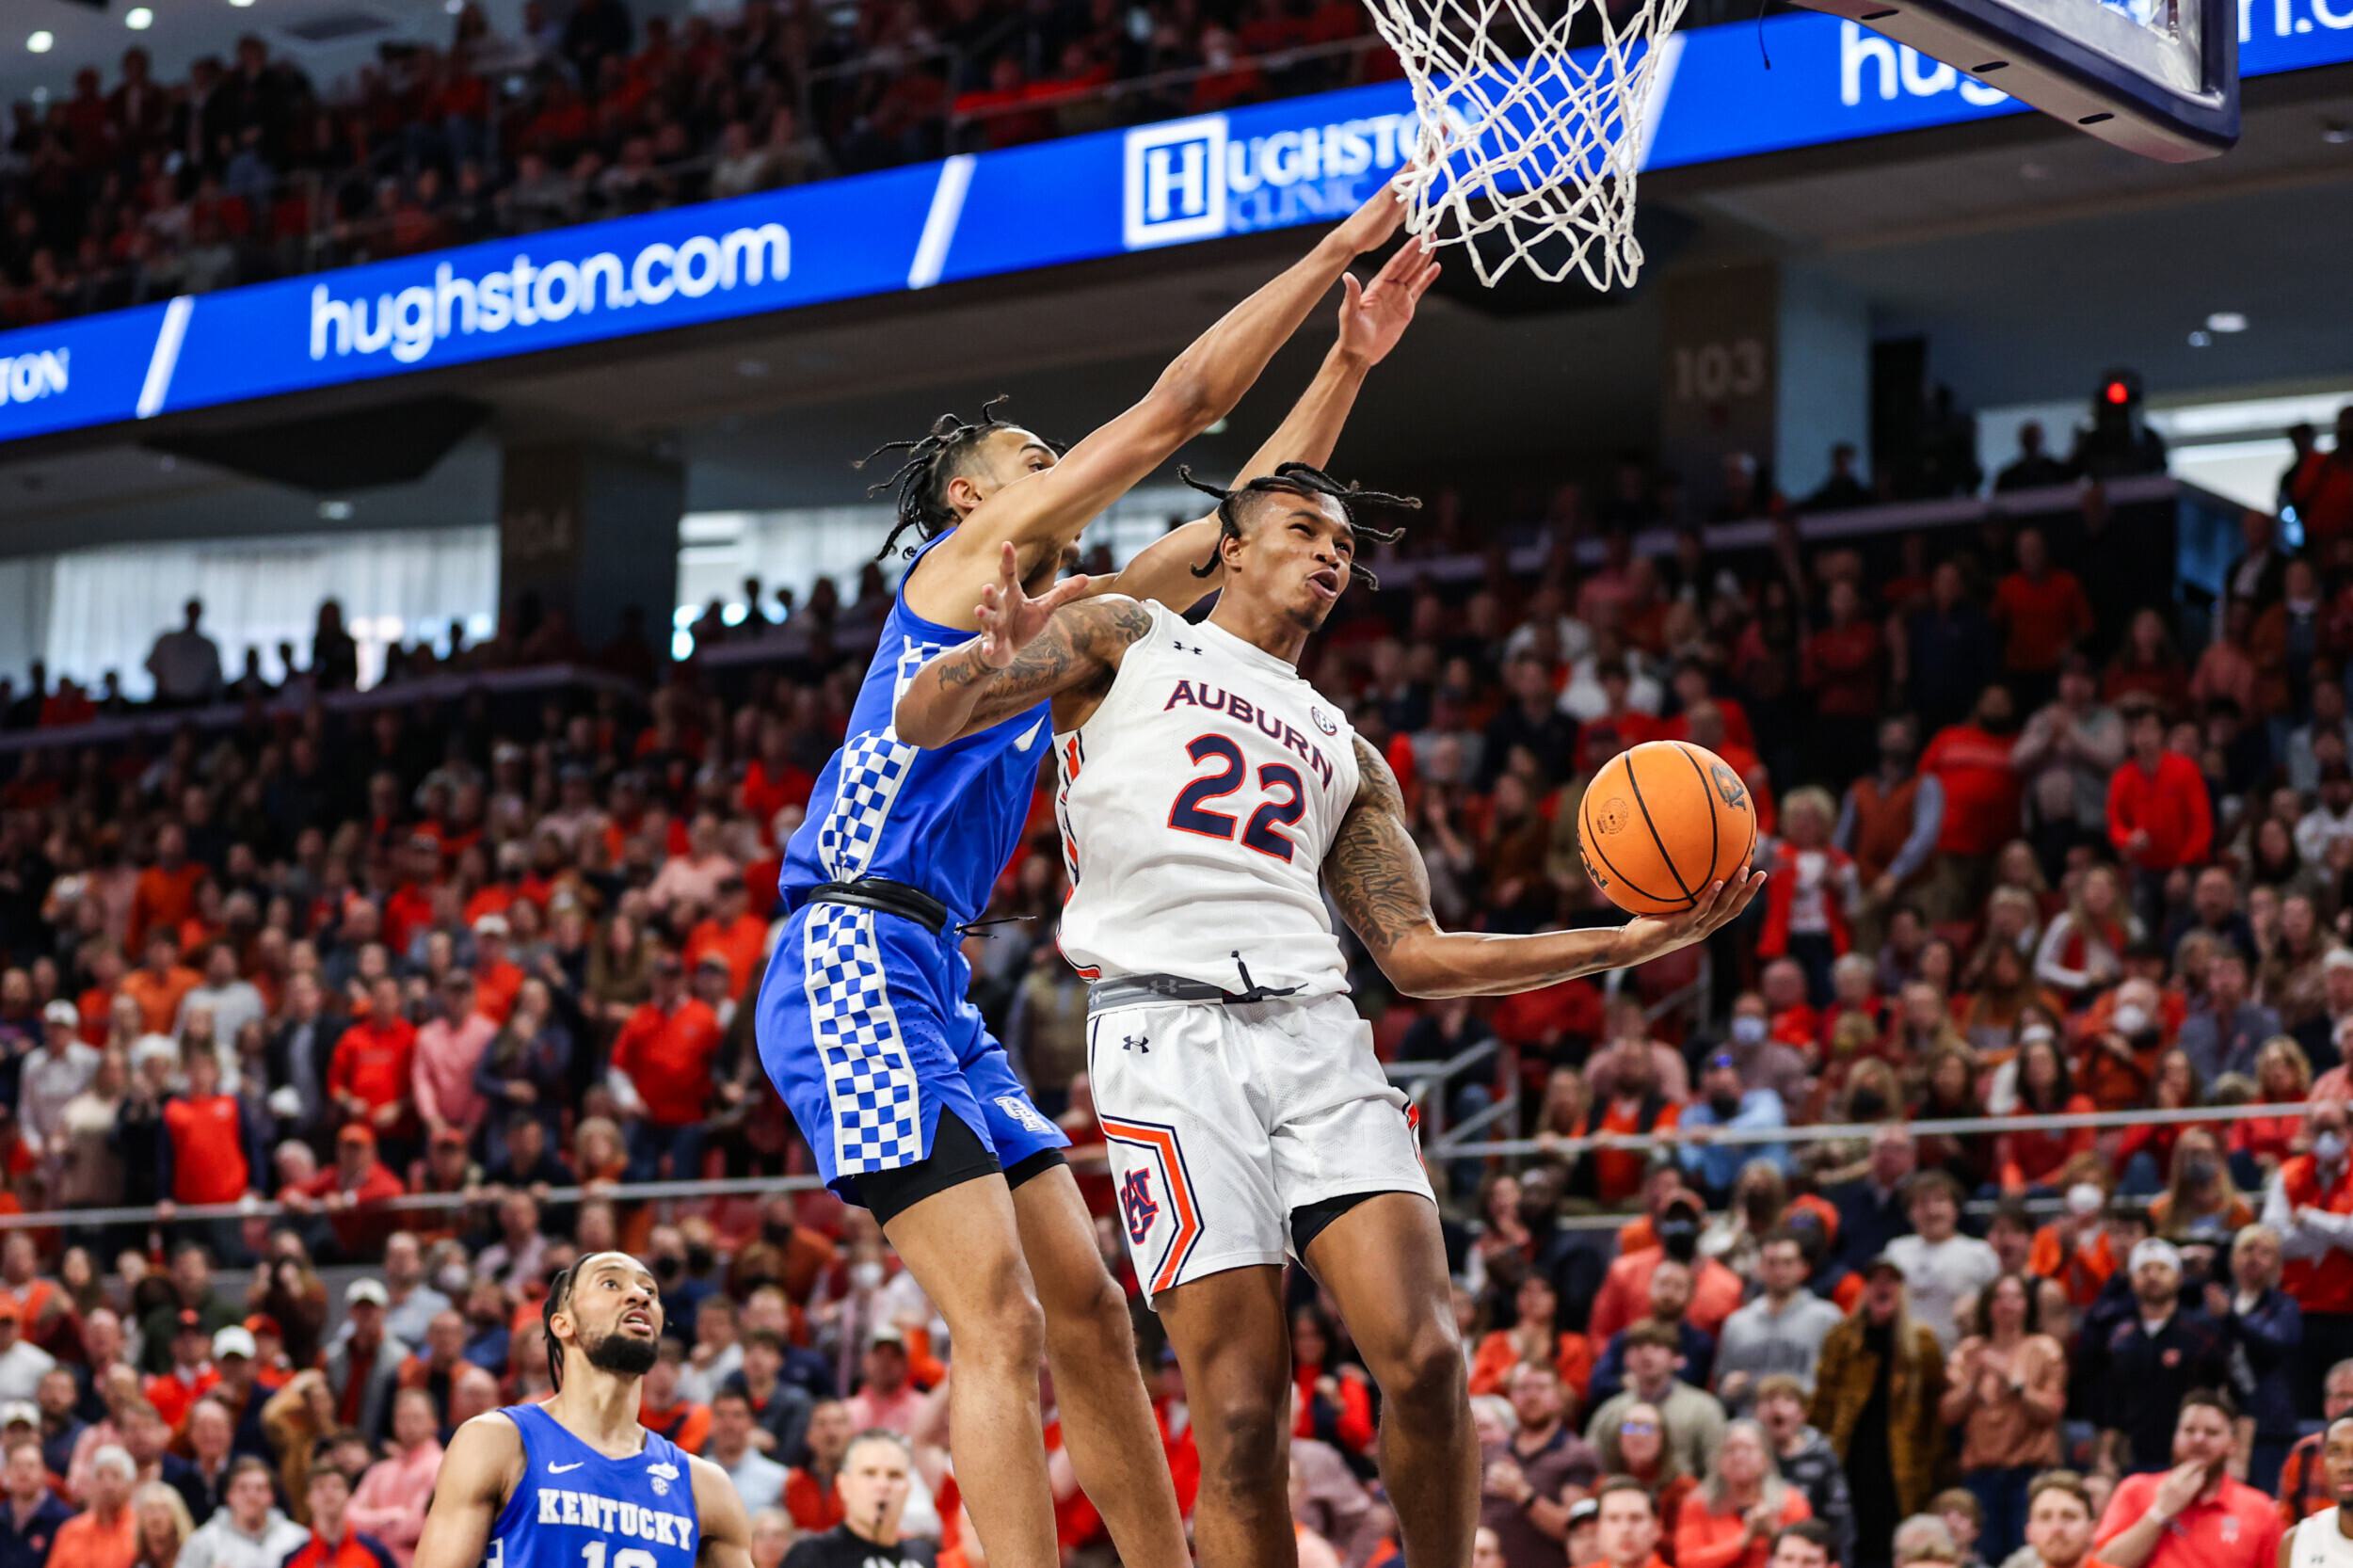 Jan 22, 2022; Auburn, AL, USA; Allen Flanigan (22) goes up for a shot during the game between Auburn and Kentucky at Auburn Arena. Mandatory Credit: Jacob Taylor/AU Athletics